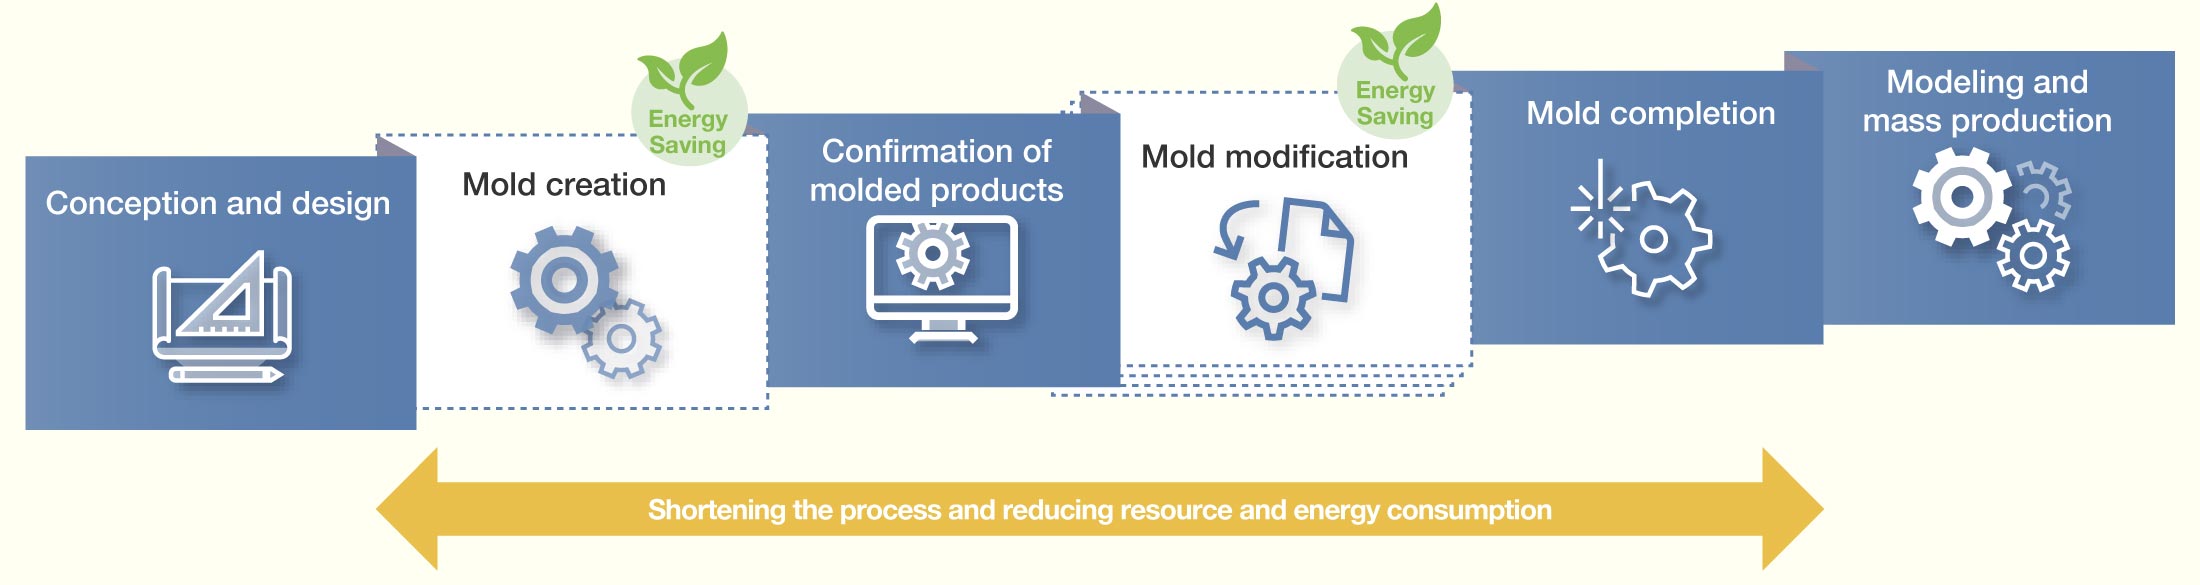 Shorten development process and reduce energy consumption by eliminating the need for molds